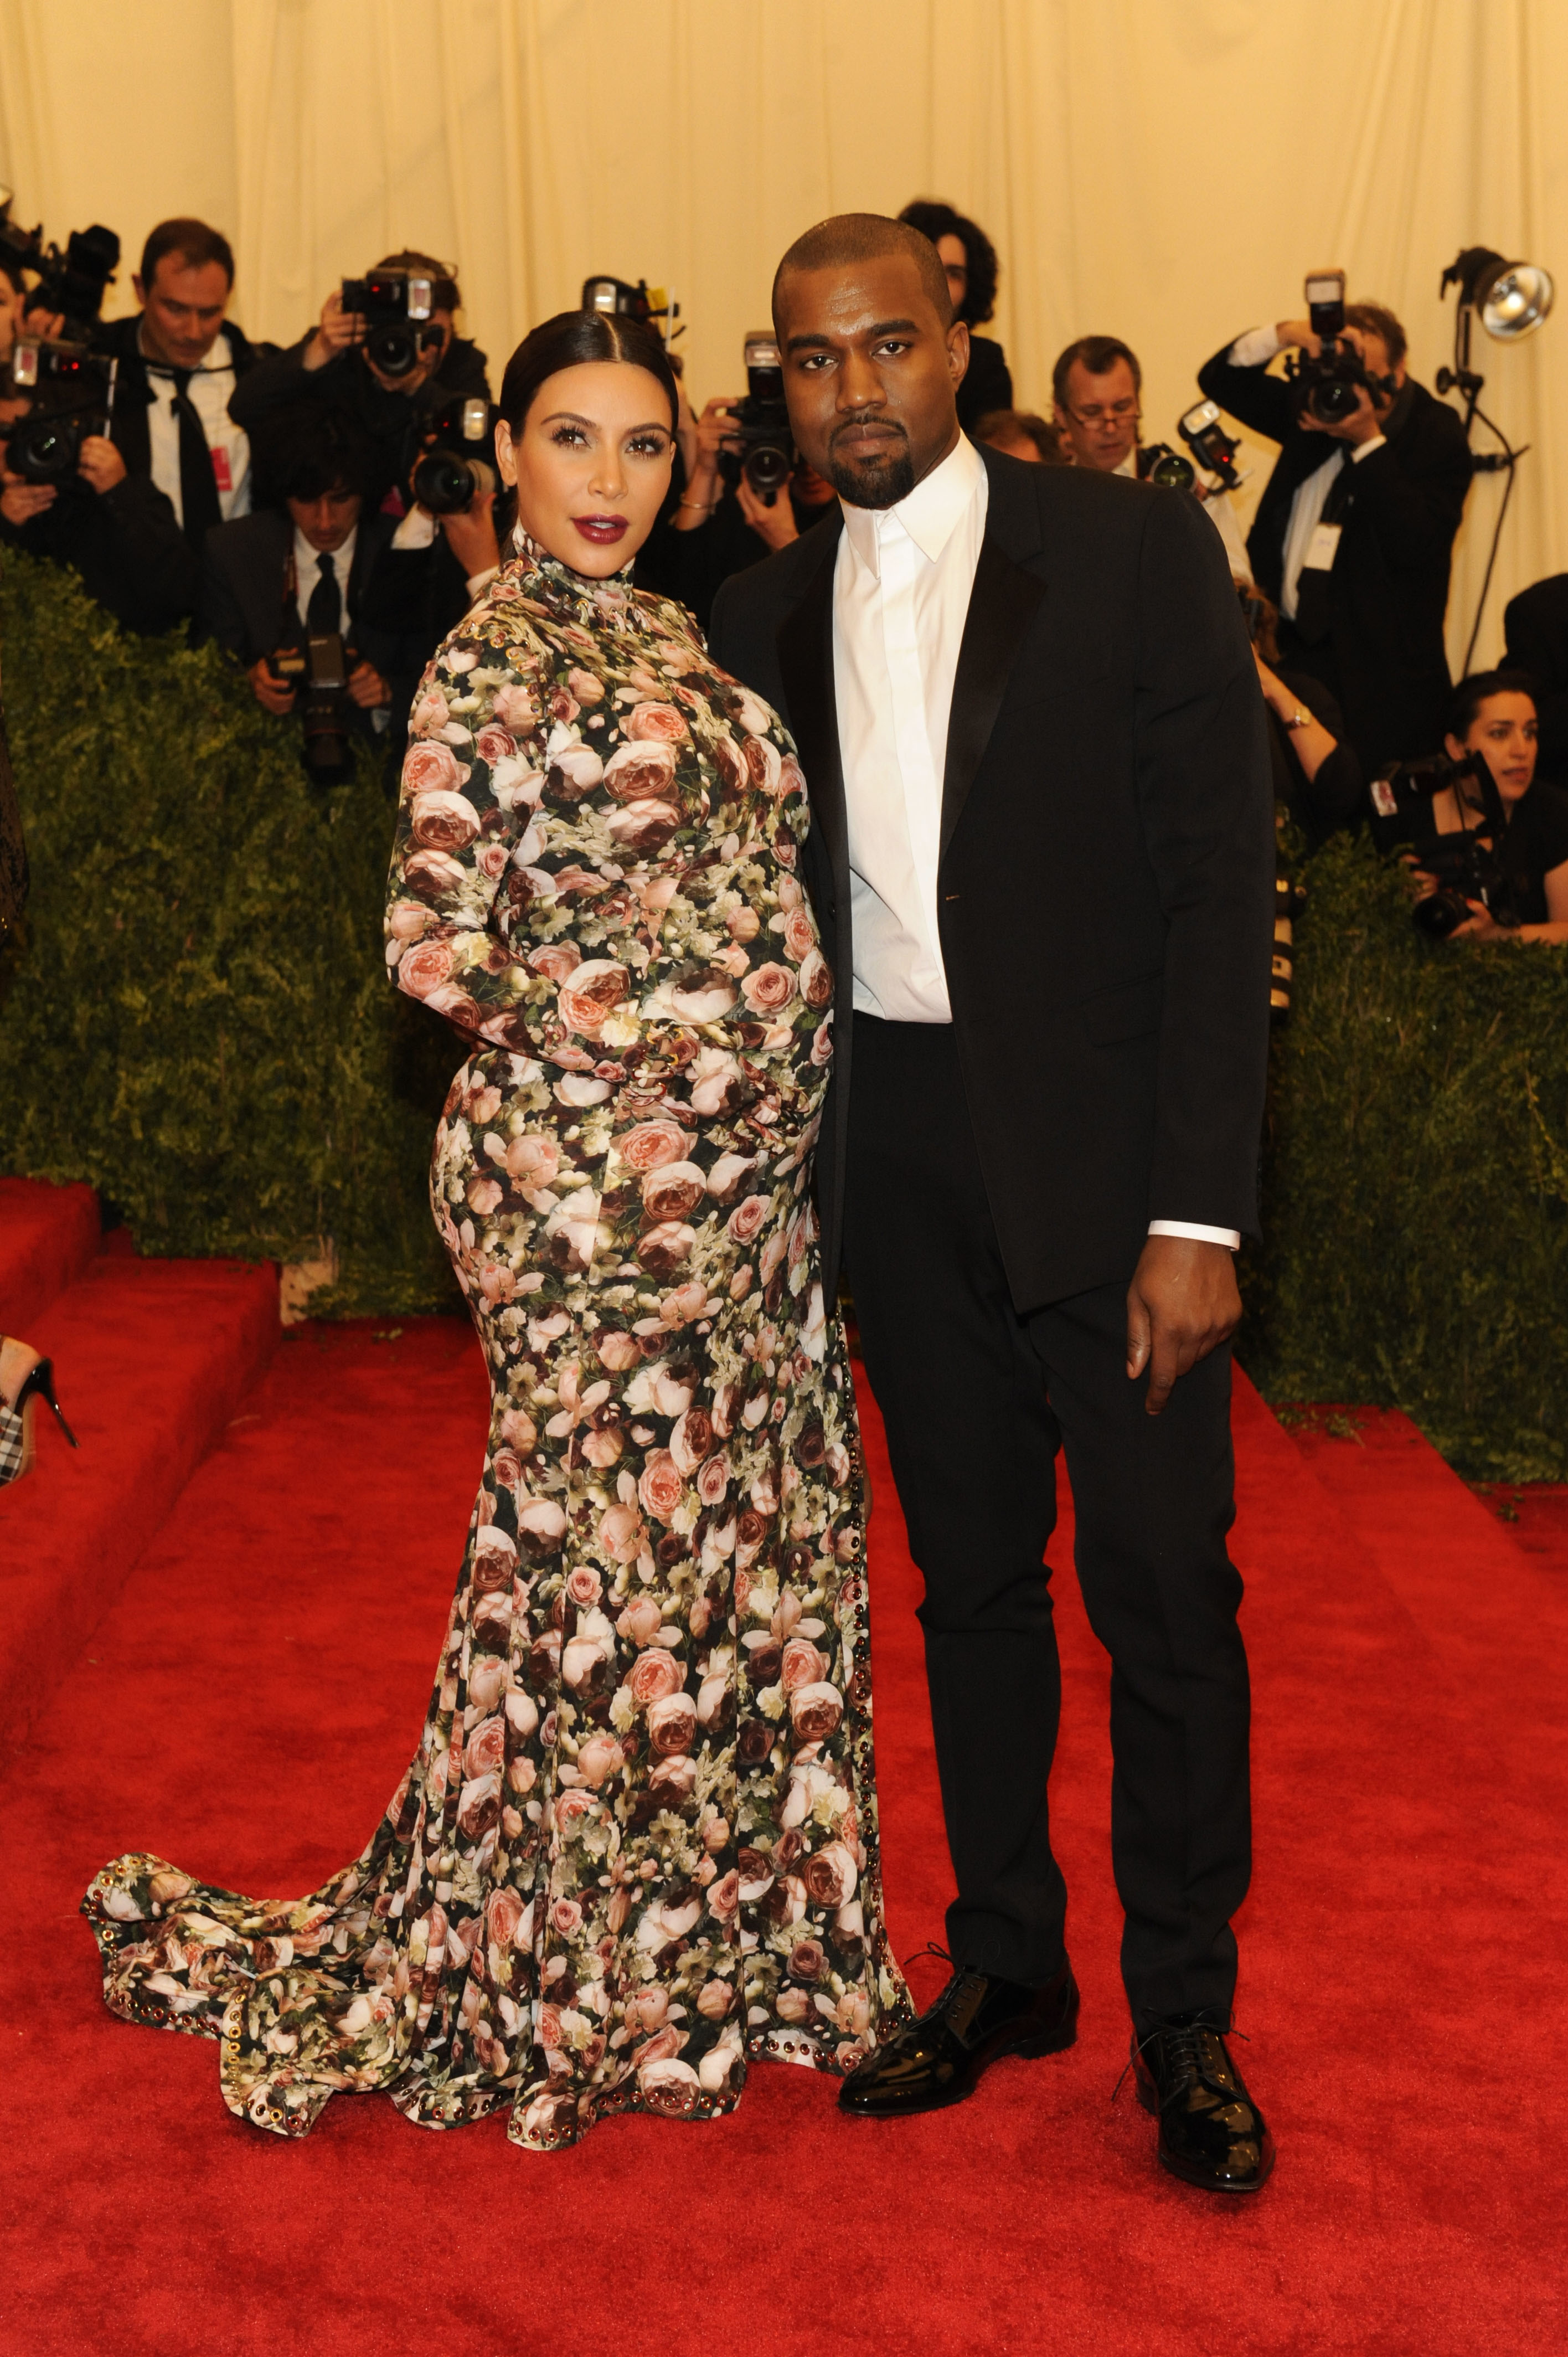 Kim Kardashian in a floral dress and Kanye West in a black suit on the red carpet